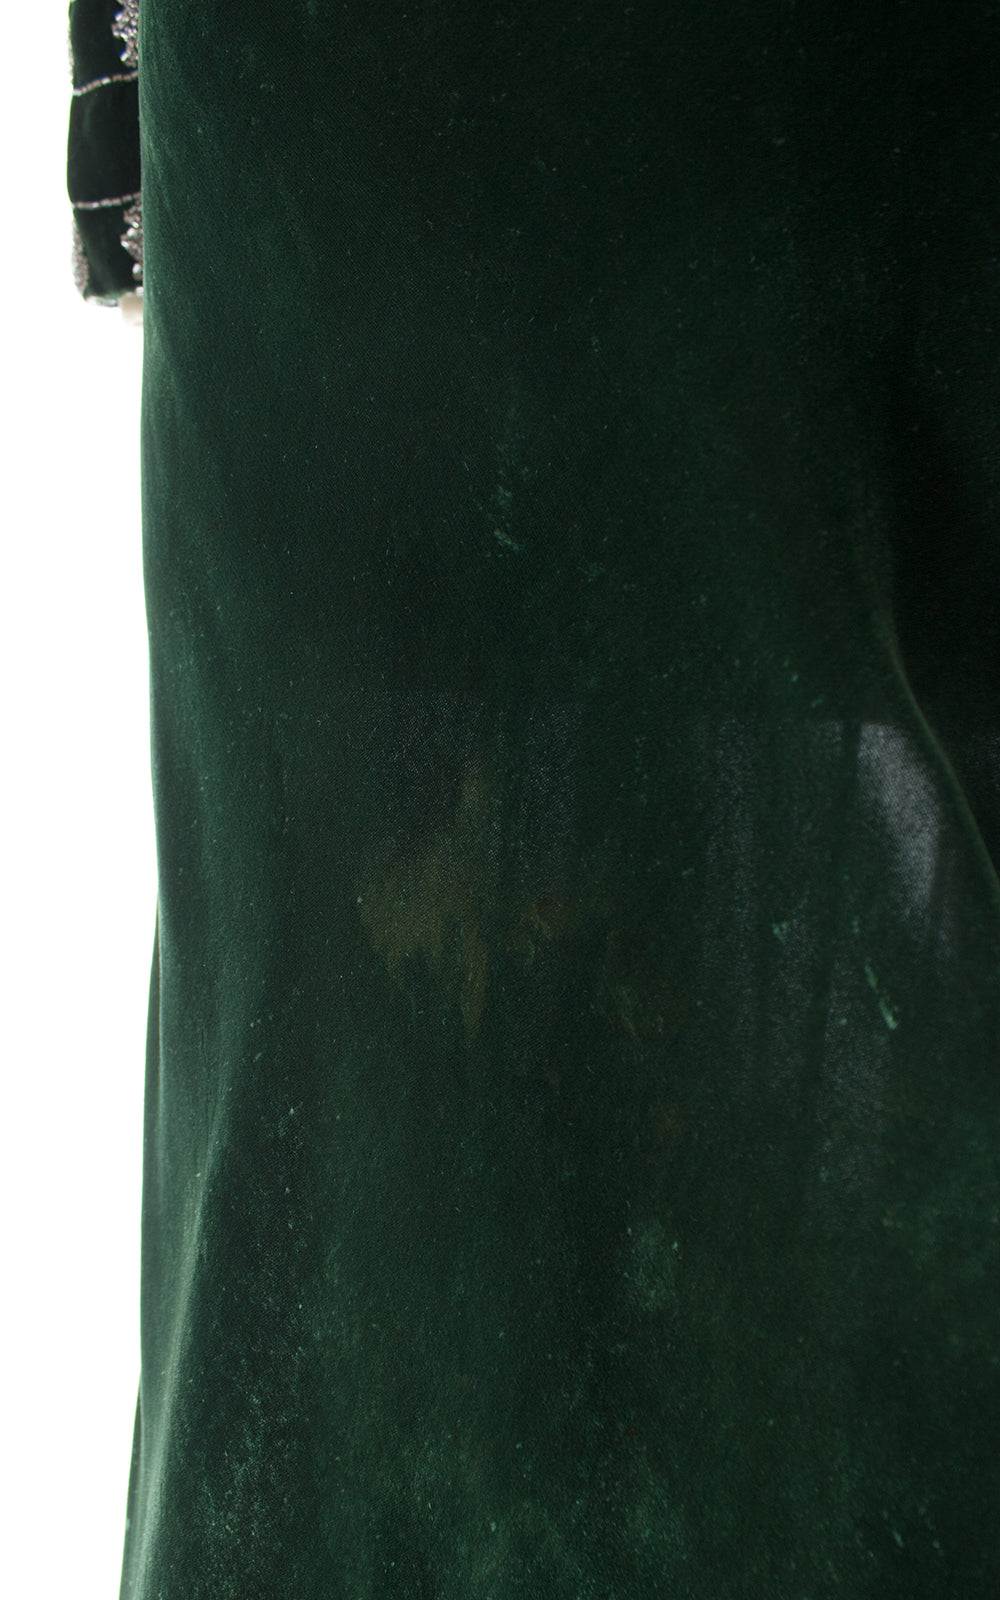 1930s Forest Green Bias Cut Velvet with Beaded Slit Sleeves Gown